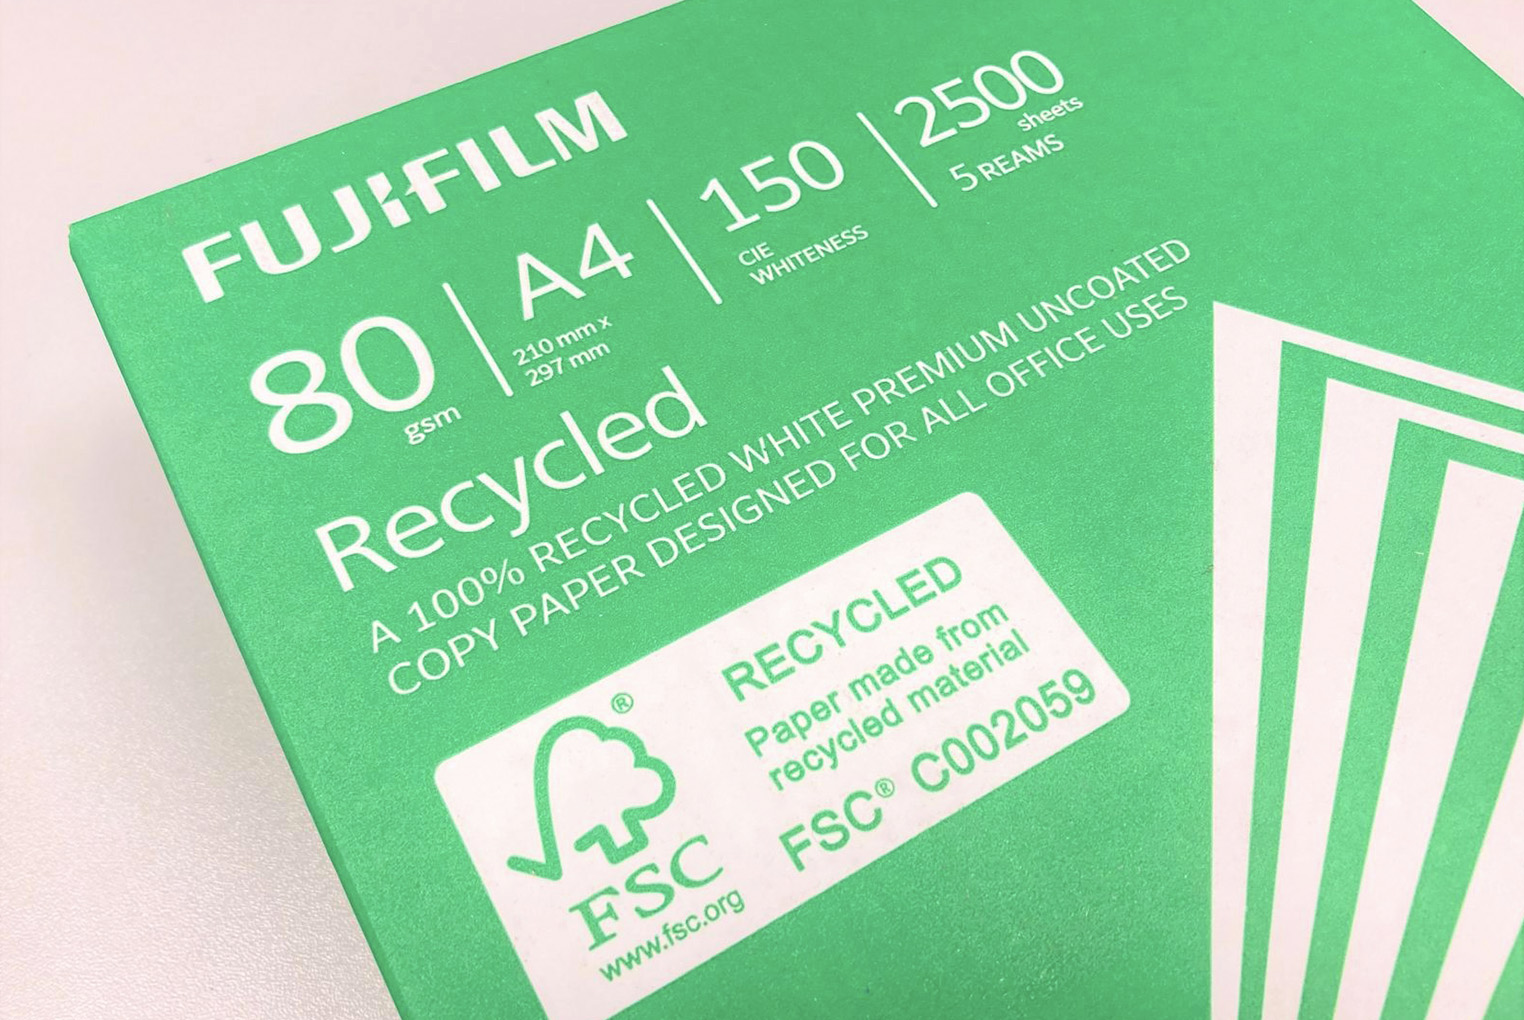 Paper Products with Recycled Content and from Certified Sustainable Sources